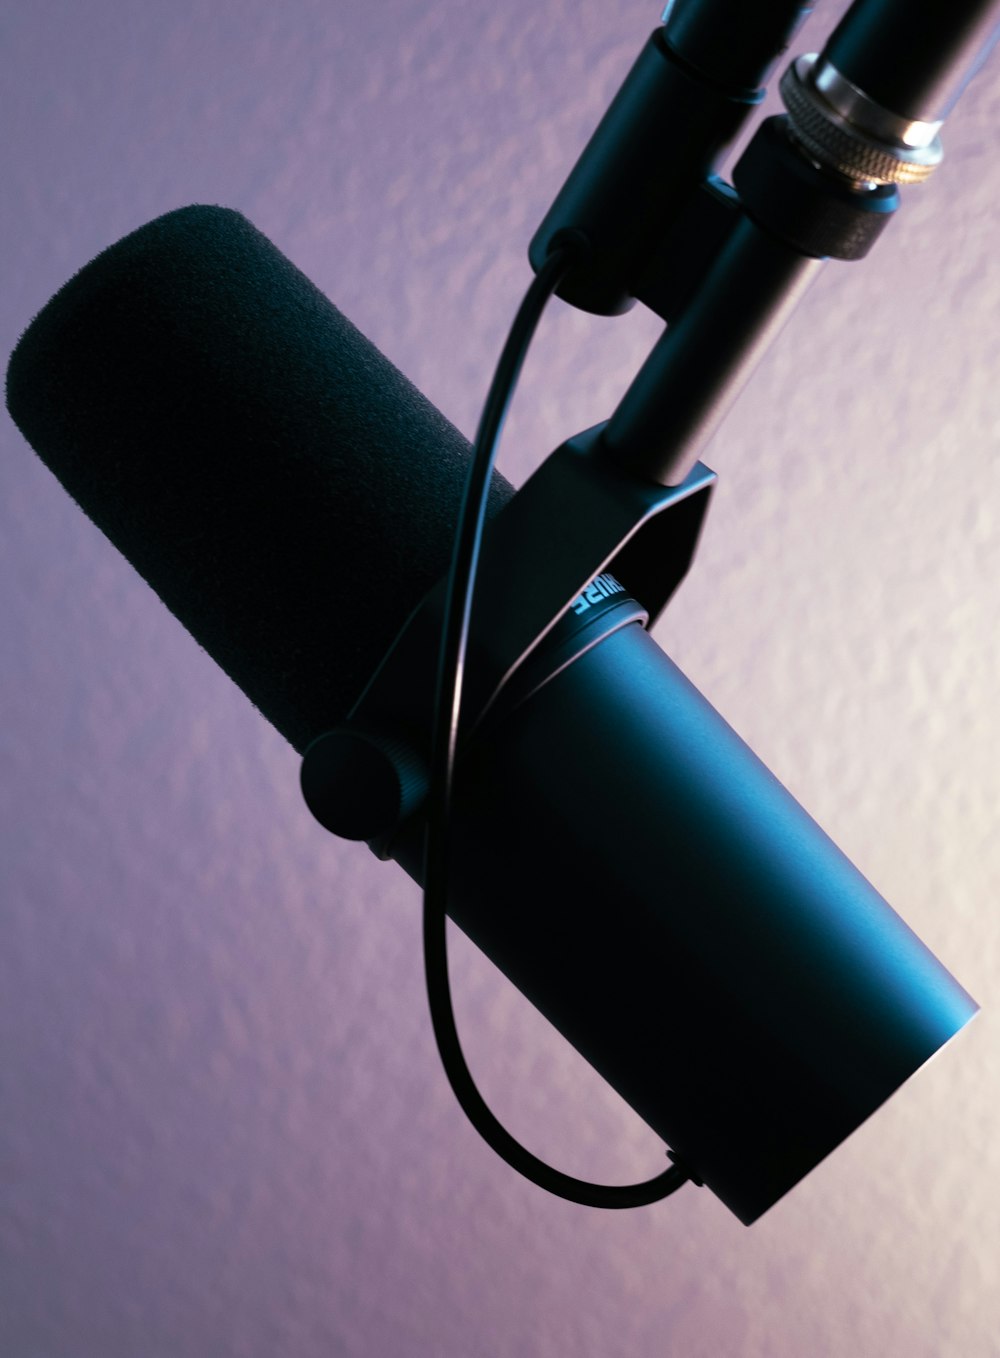 black and gray corded microphone